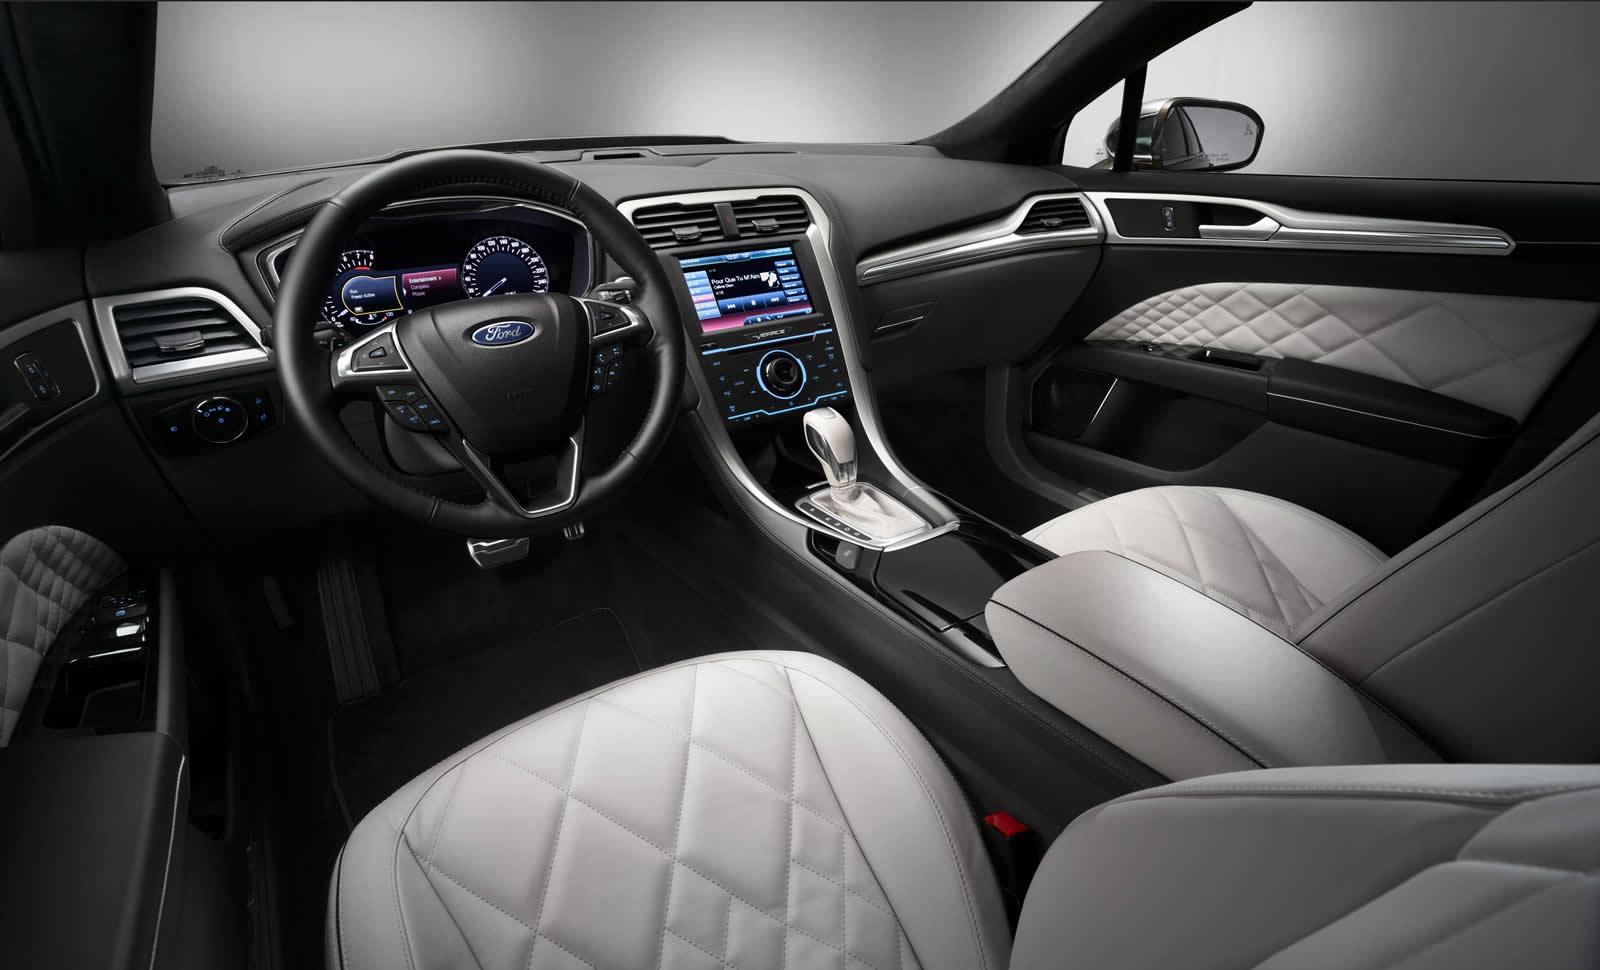 Discover more than 82 mondeo interior latest